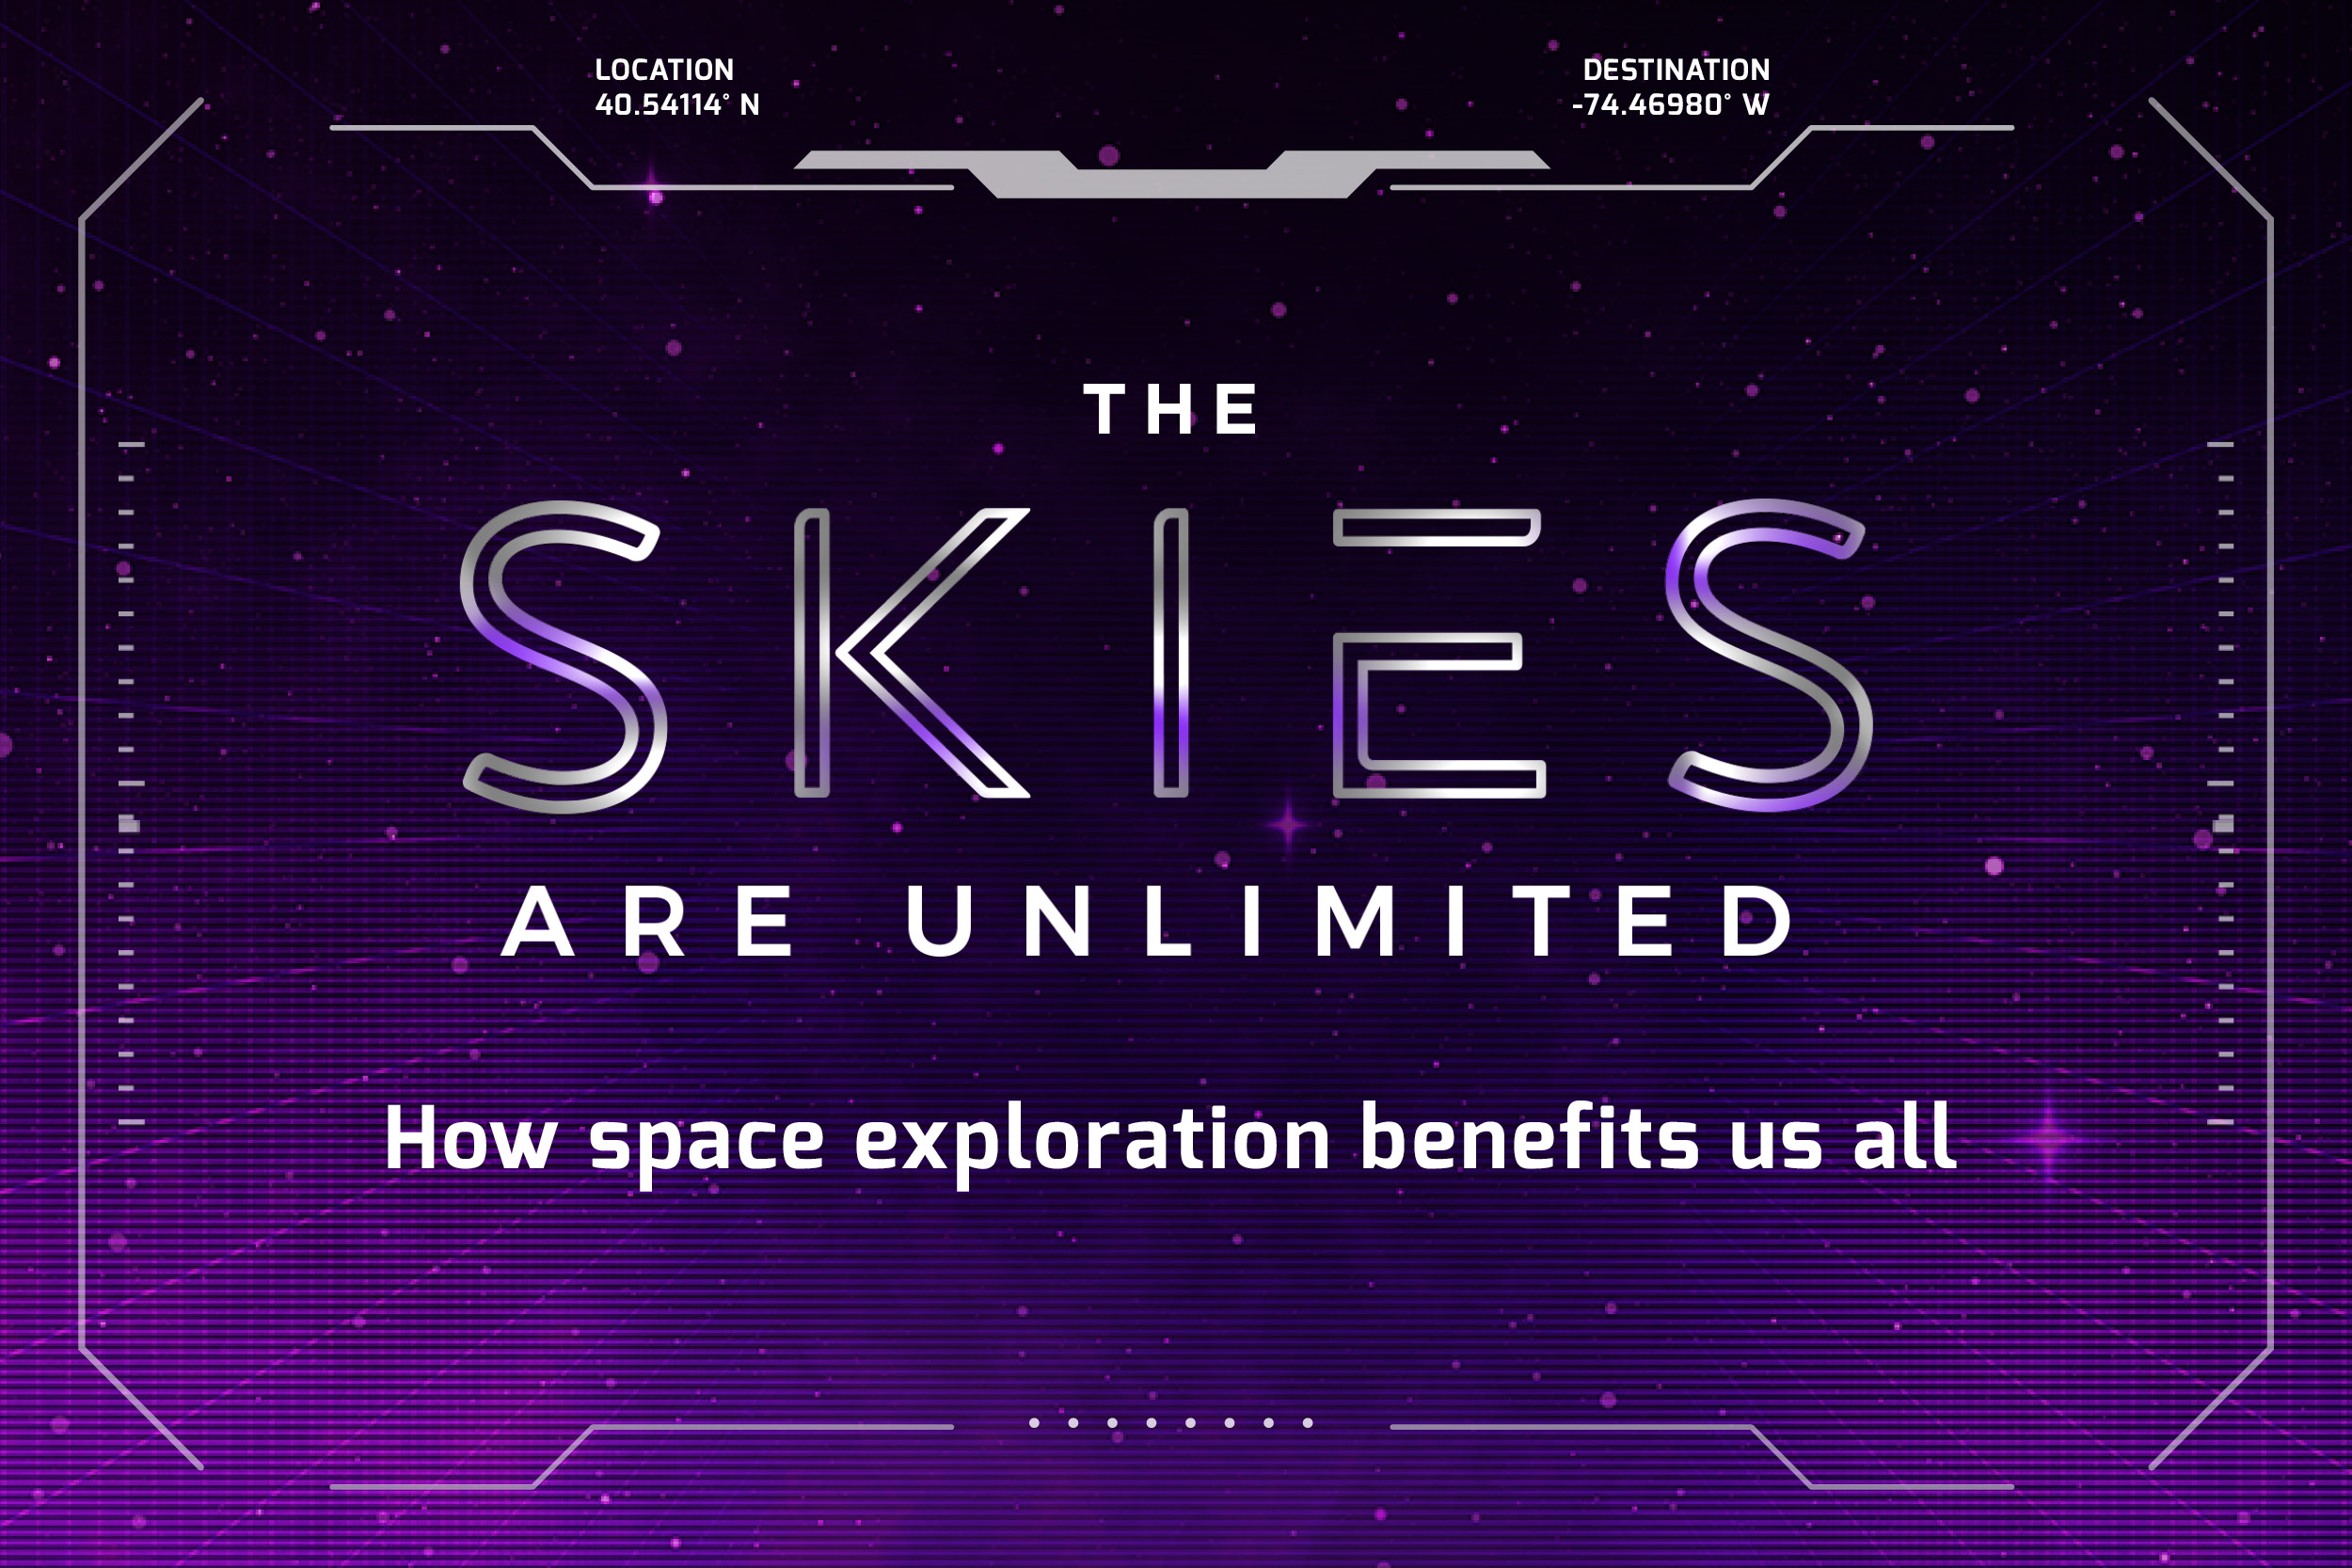 Purple and black space scene with the words in white, “The Skies Are Unlimited: How space exploration benefits us all.”